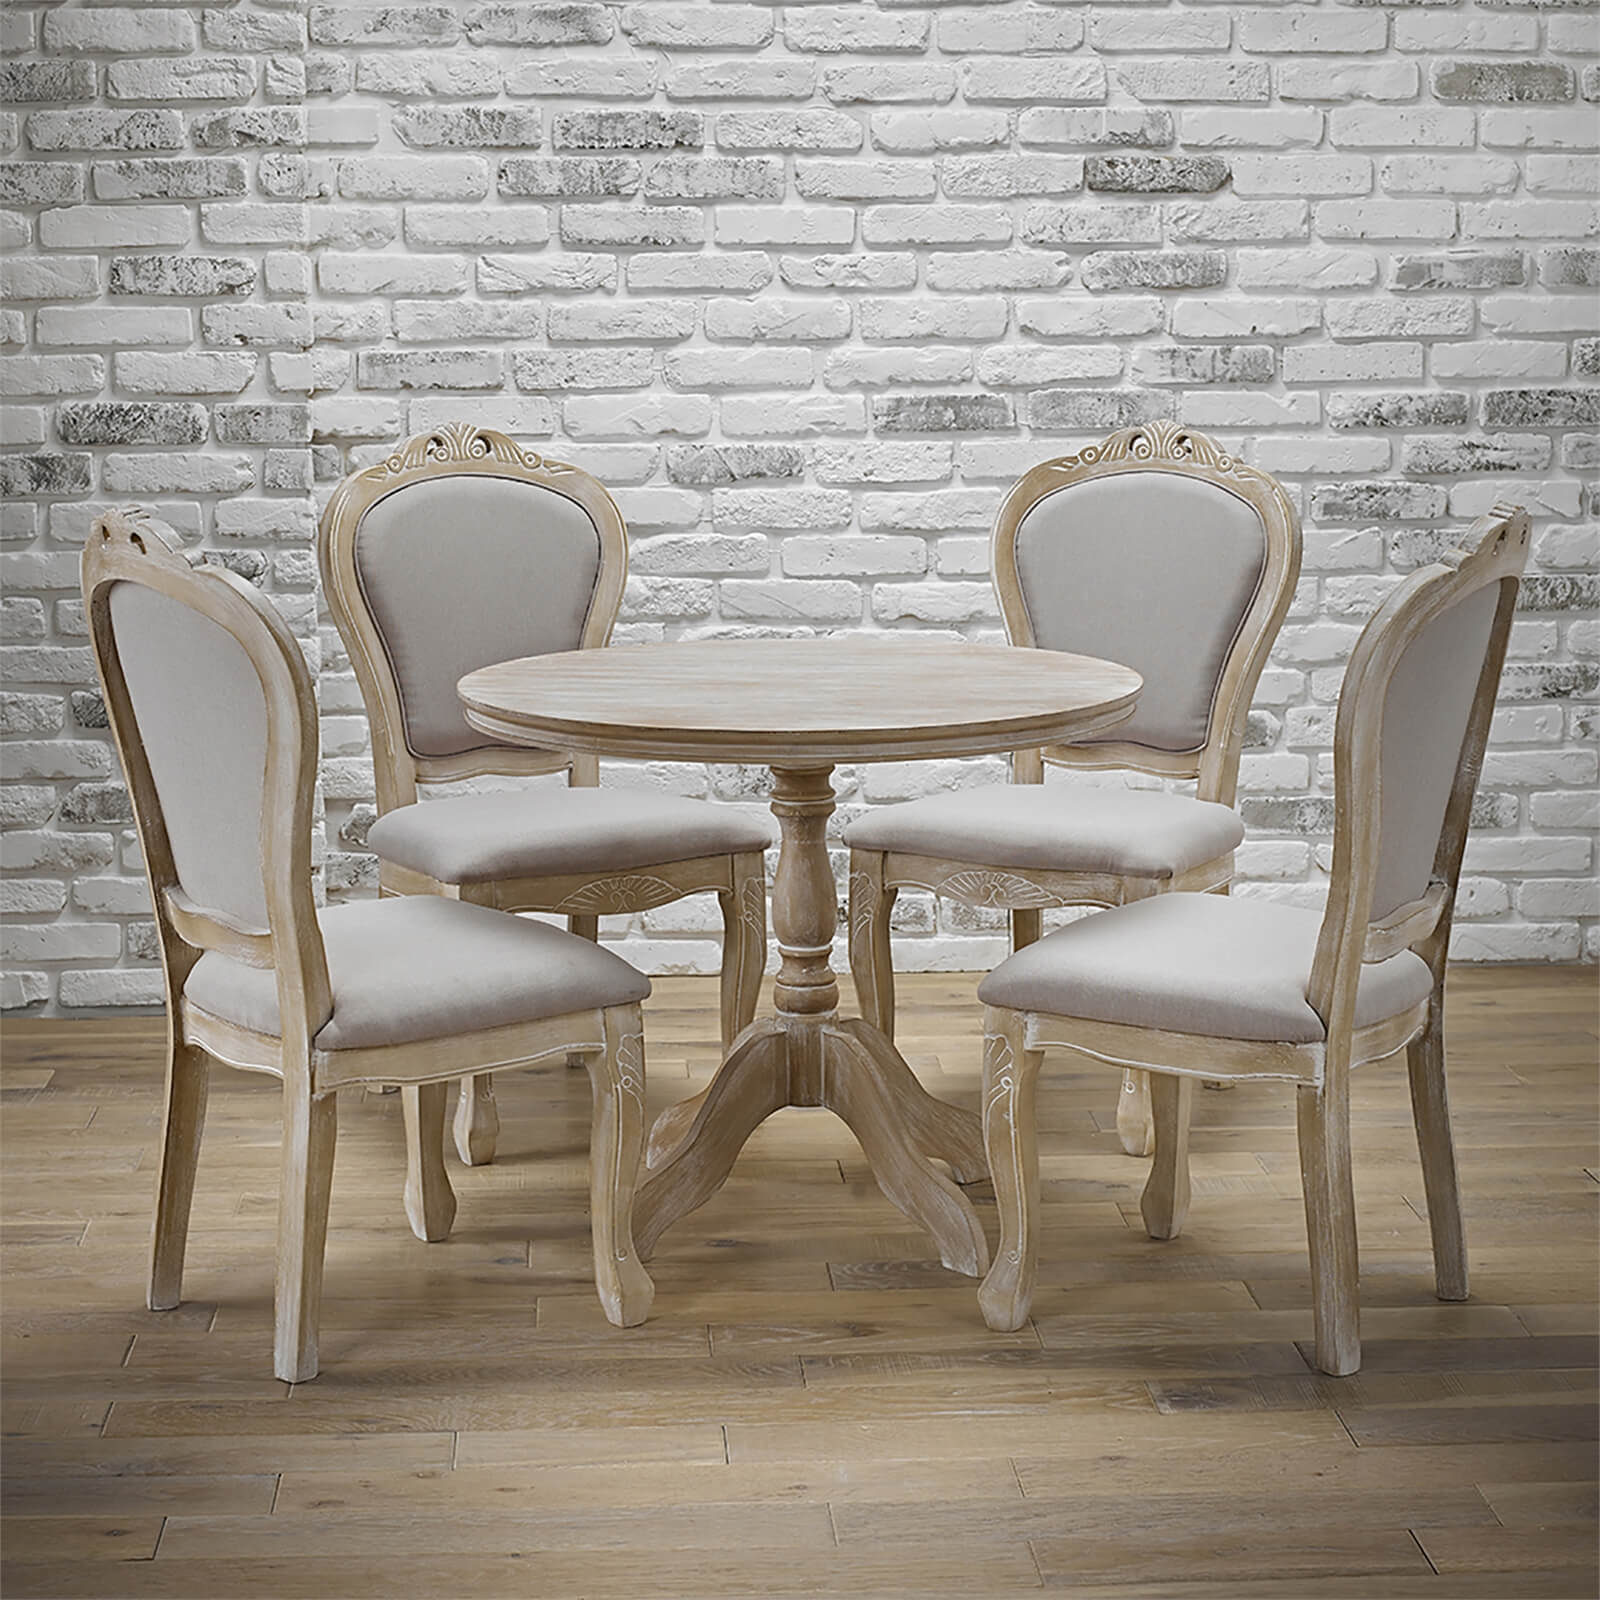 Provence Dining Chair - Set of 2